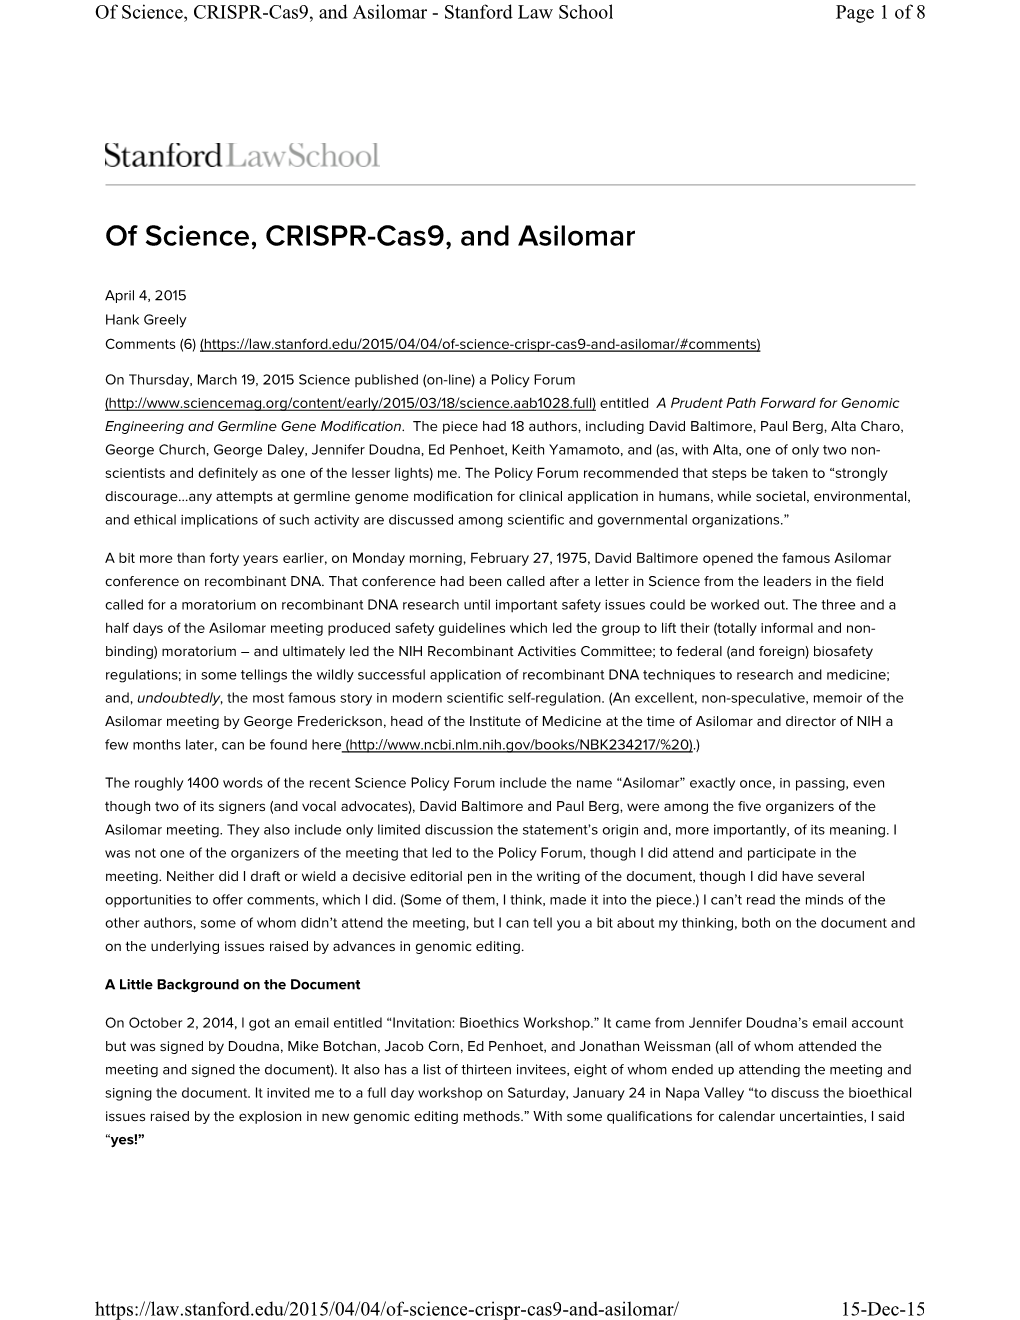 Of Science, CRISPR-Cas9, and Asilomar - Stanford Law School Page 1 of 8